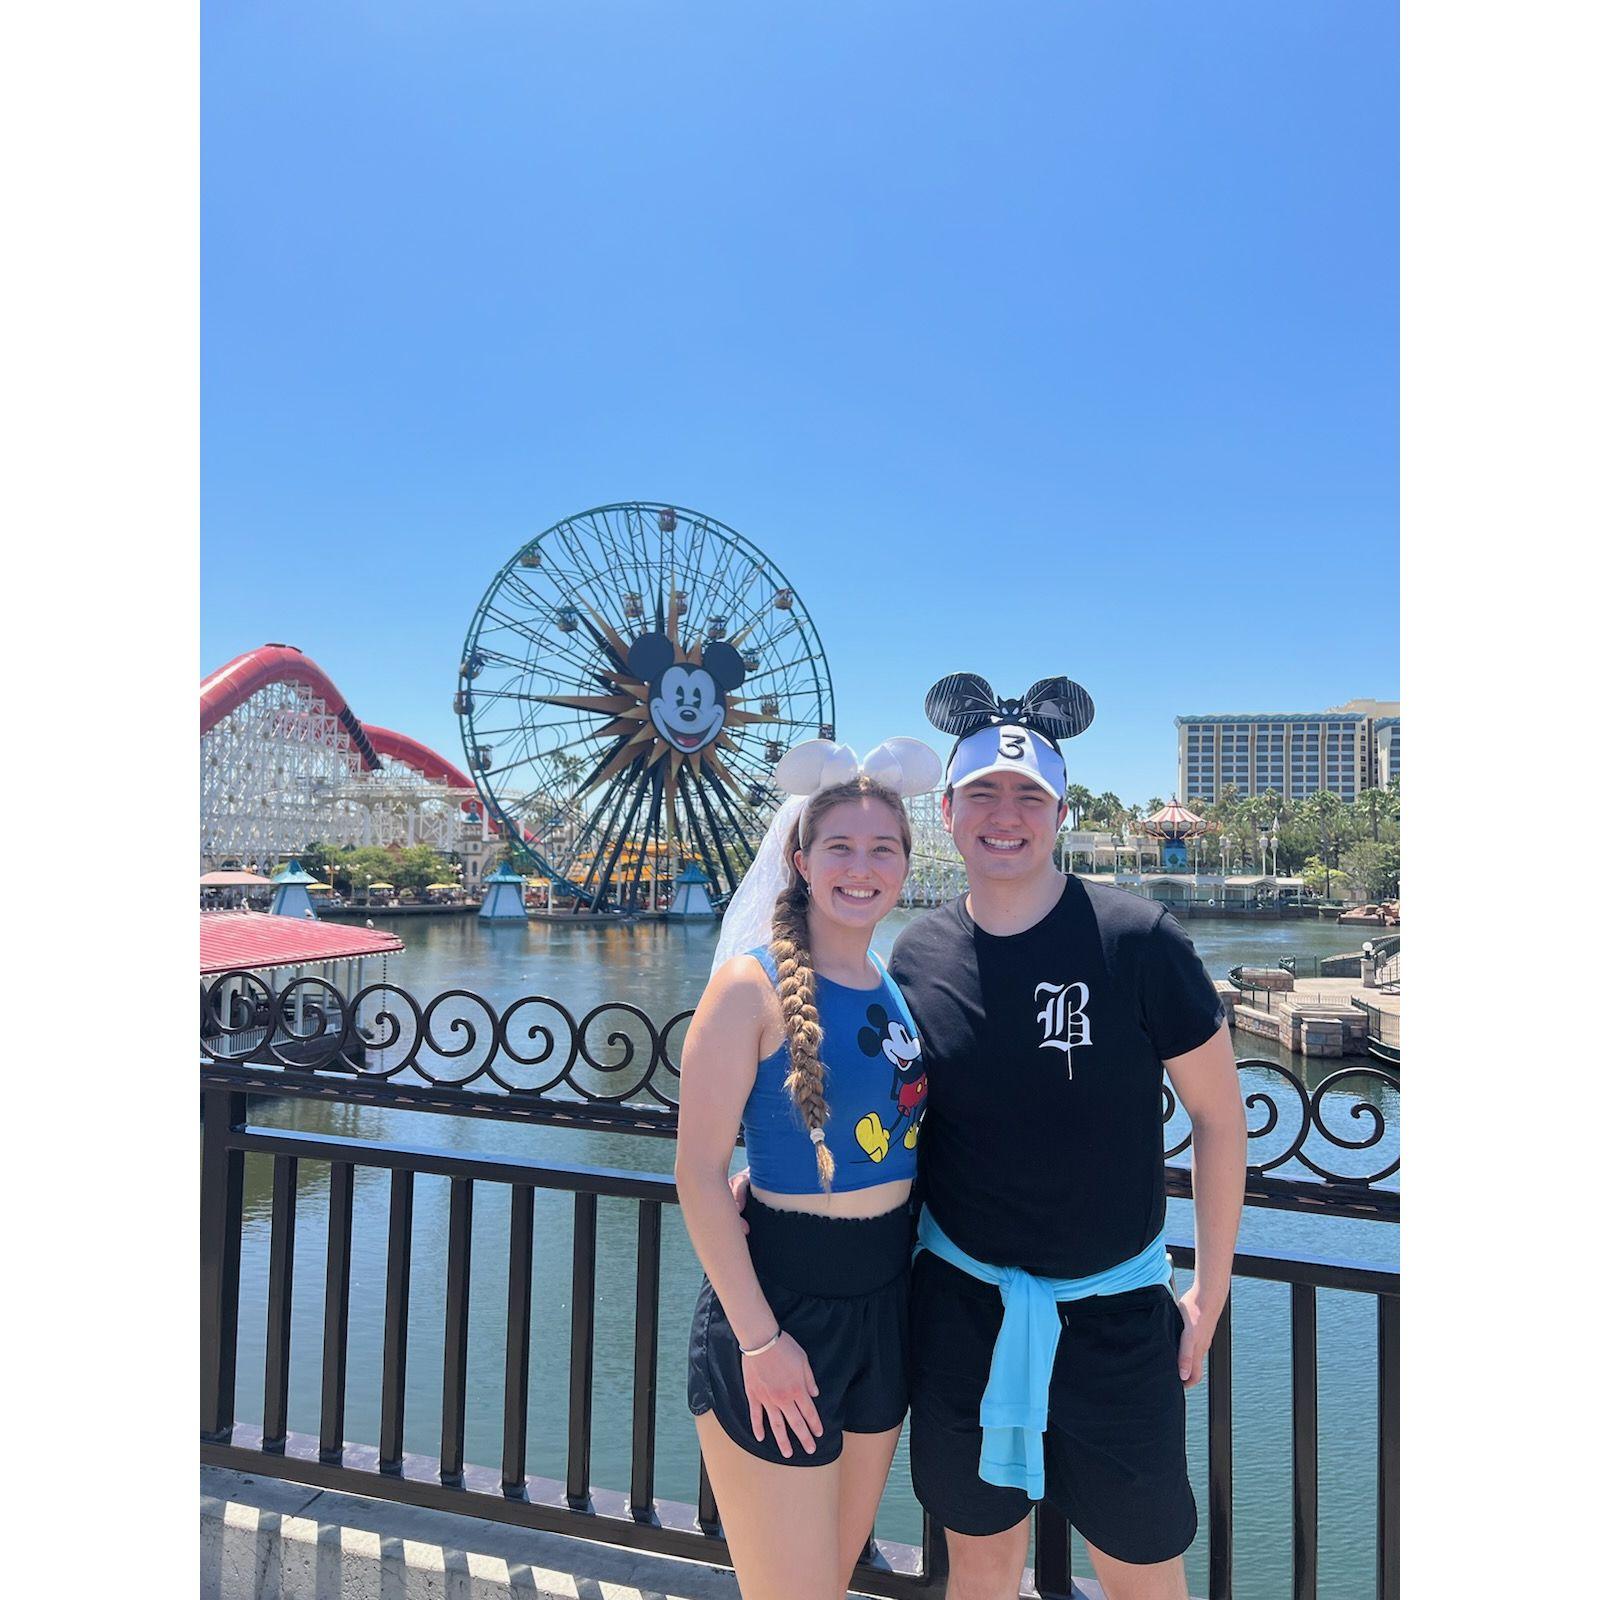 Our first trip together to Disneyland with Taylor's family.